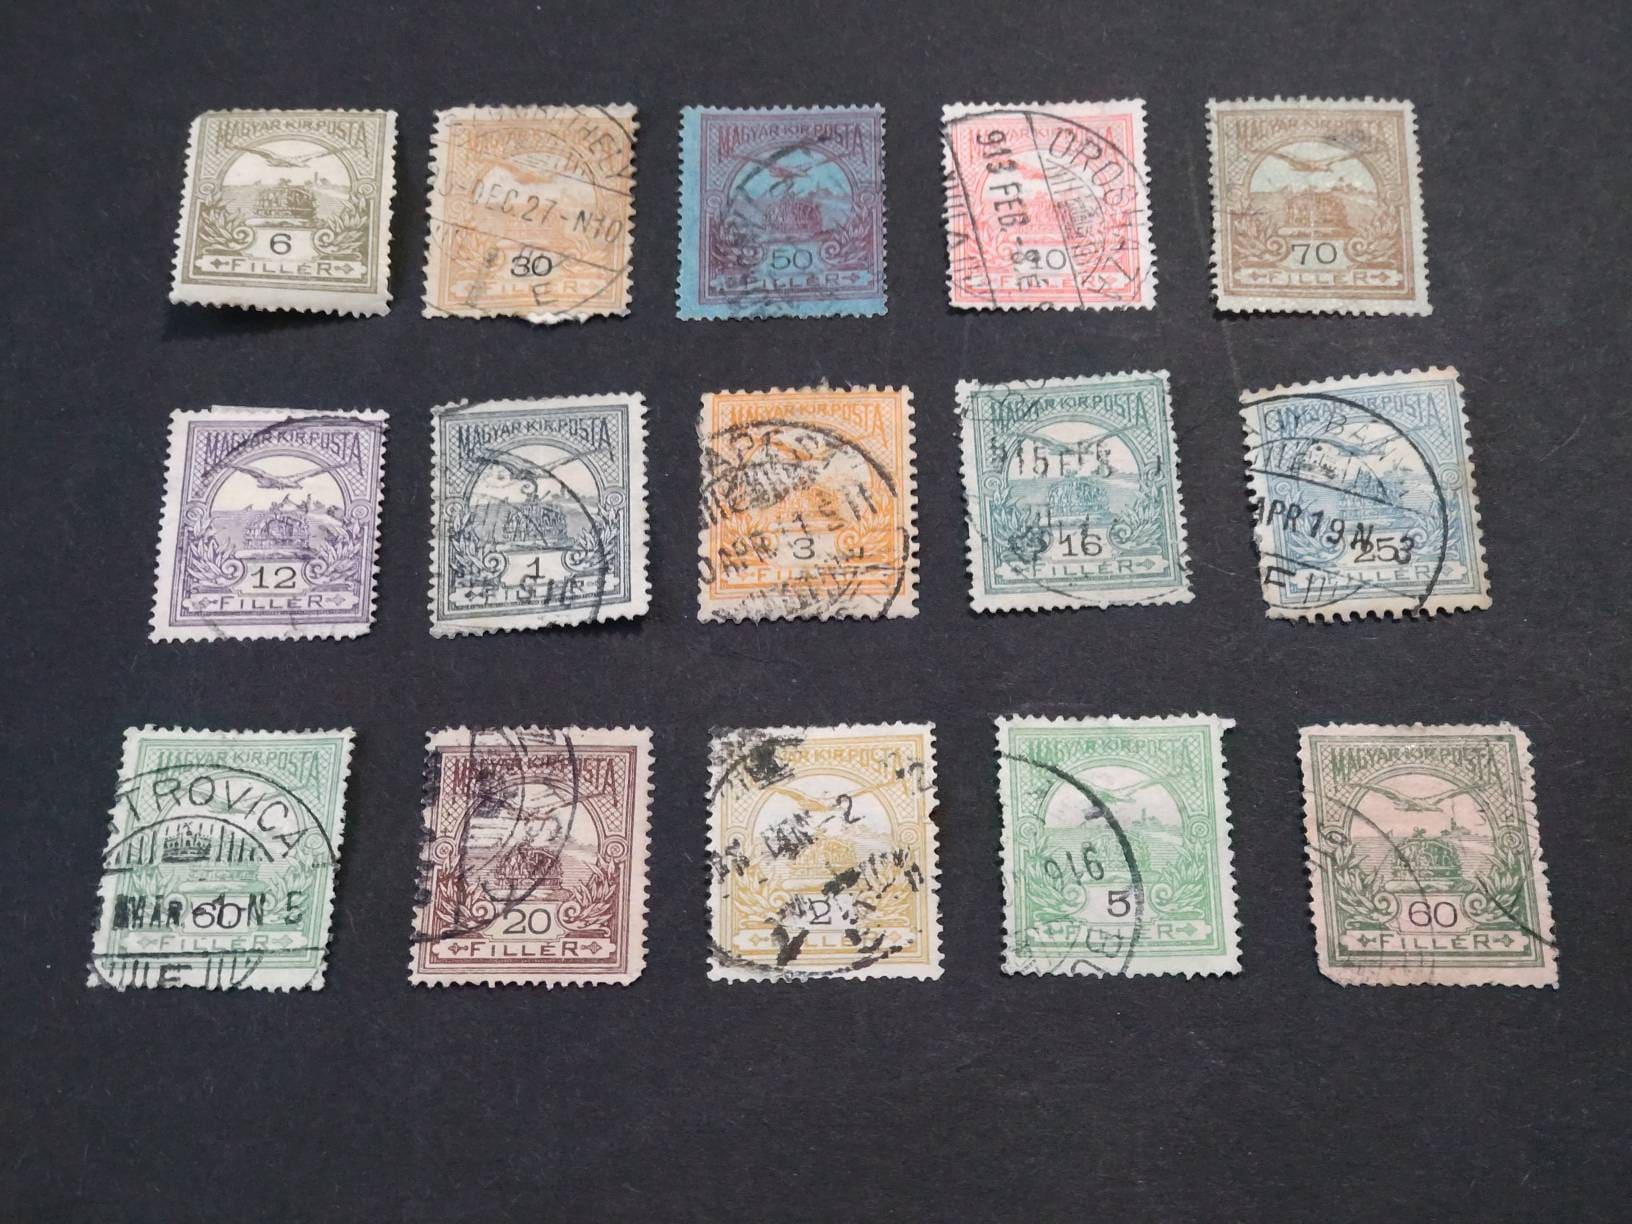 Vintage Unused US Postage Stamps .. OVERRUN NATIONS Flags Set of 13 Stamps  .. Issued in 1943 